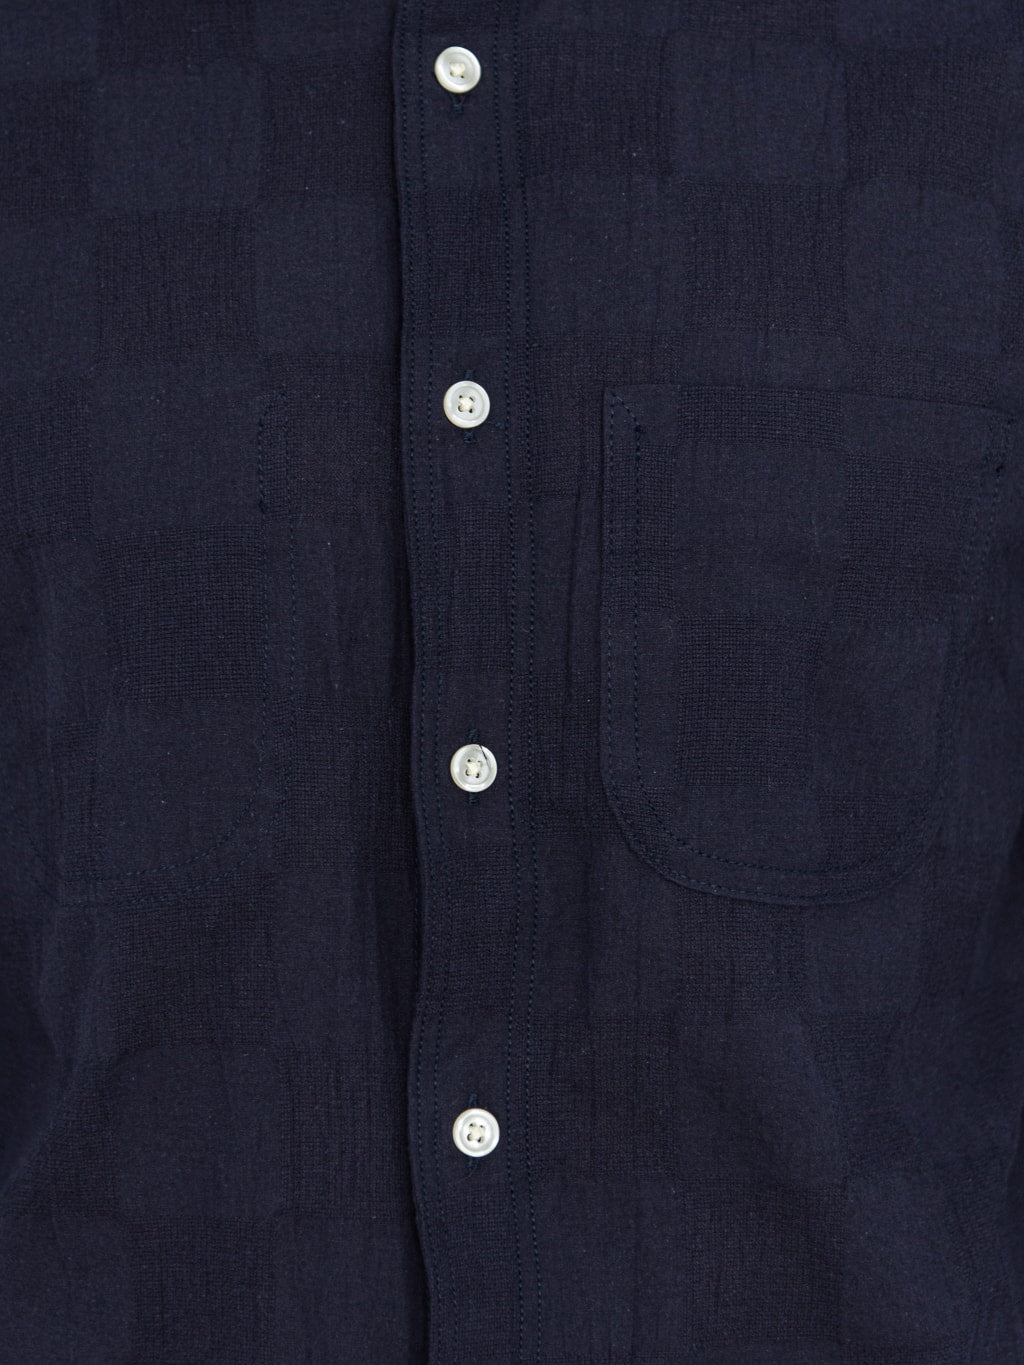 rogue territory jumper shirt navy checkered slim fit pearl buttons